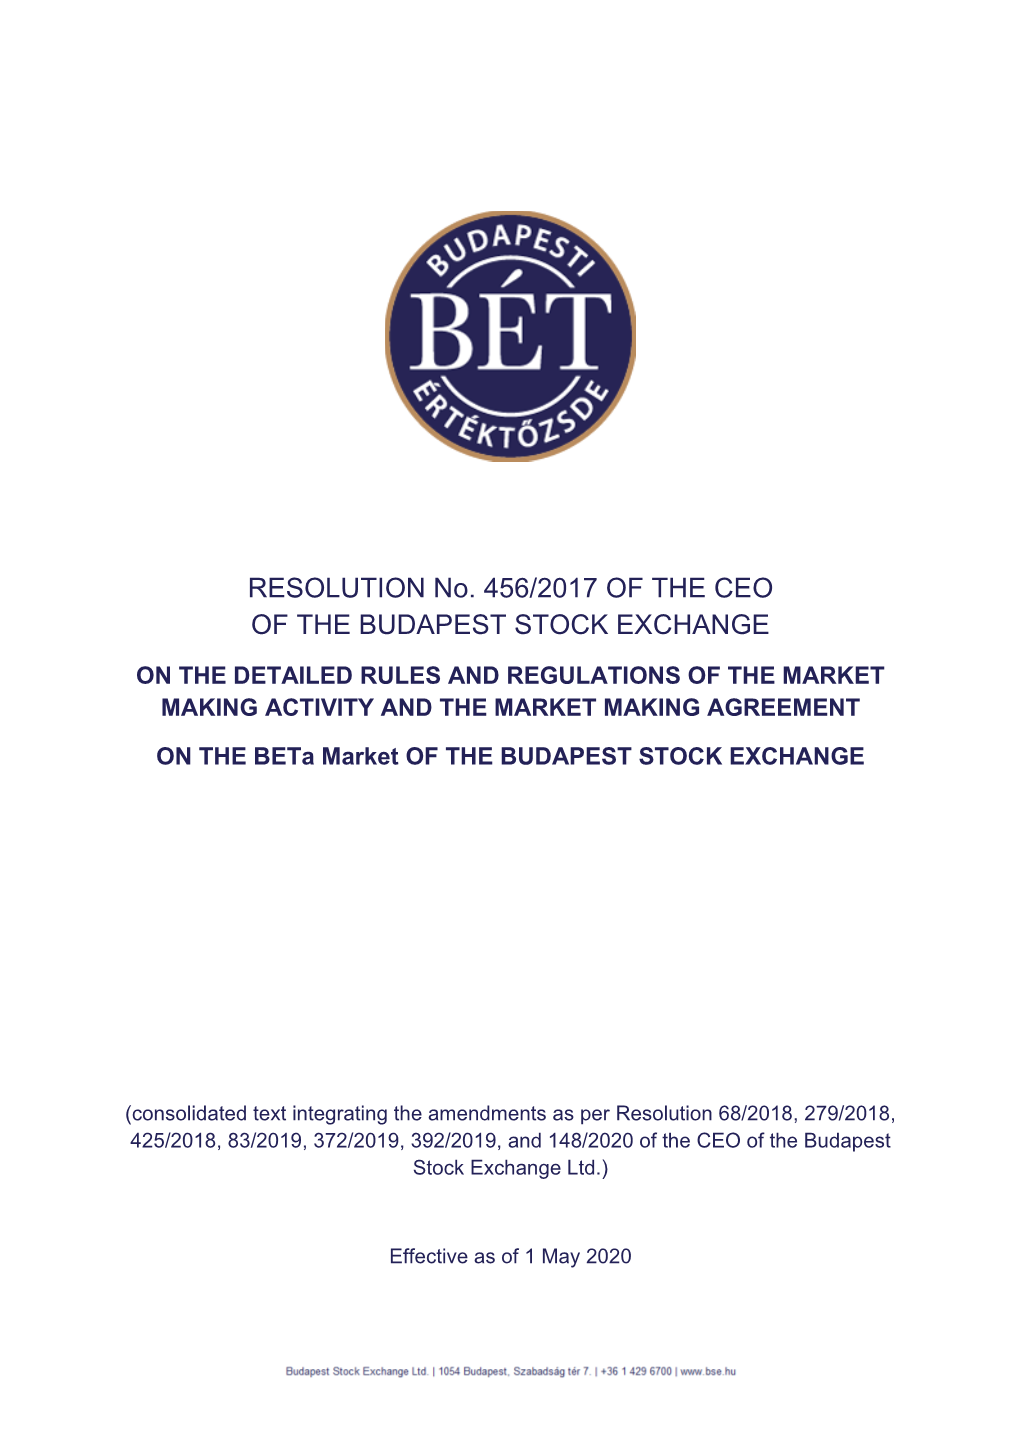 RESOLUTION No. 456/2017 of the CEO of the BUDAPEST STOCK EXCHANGE